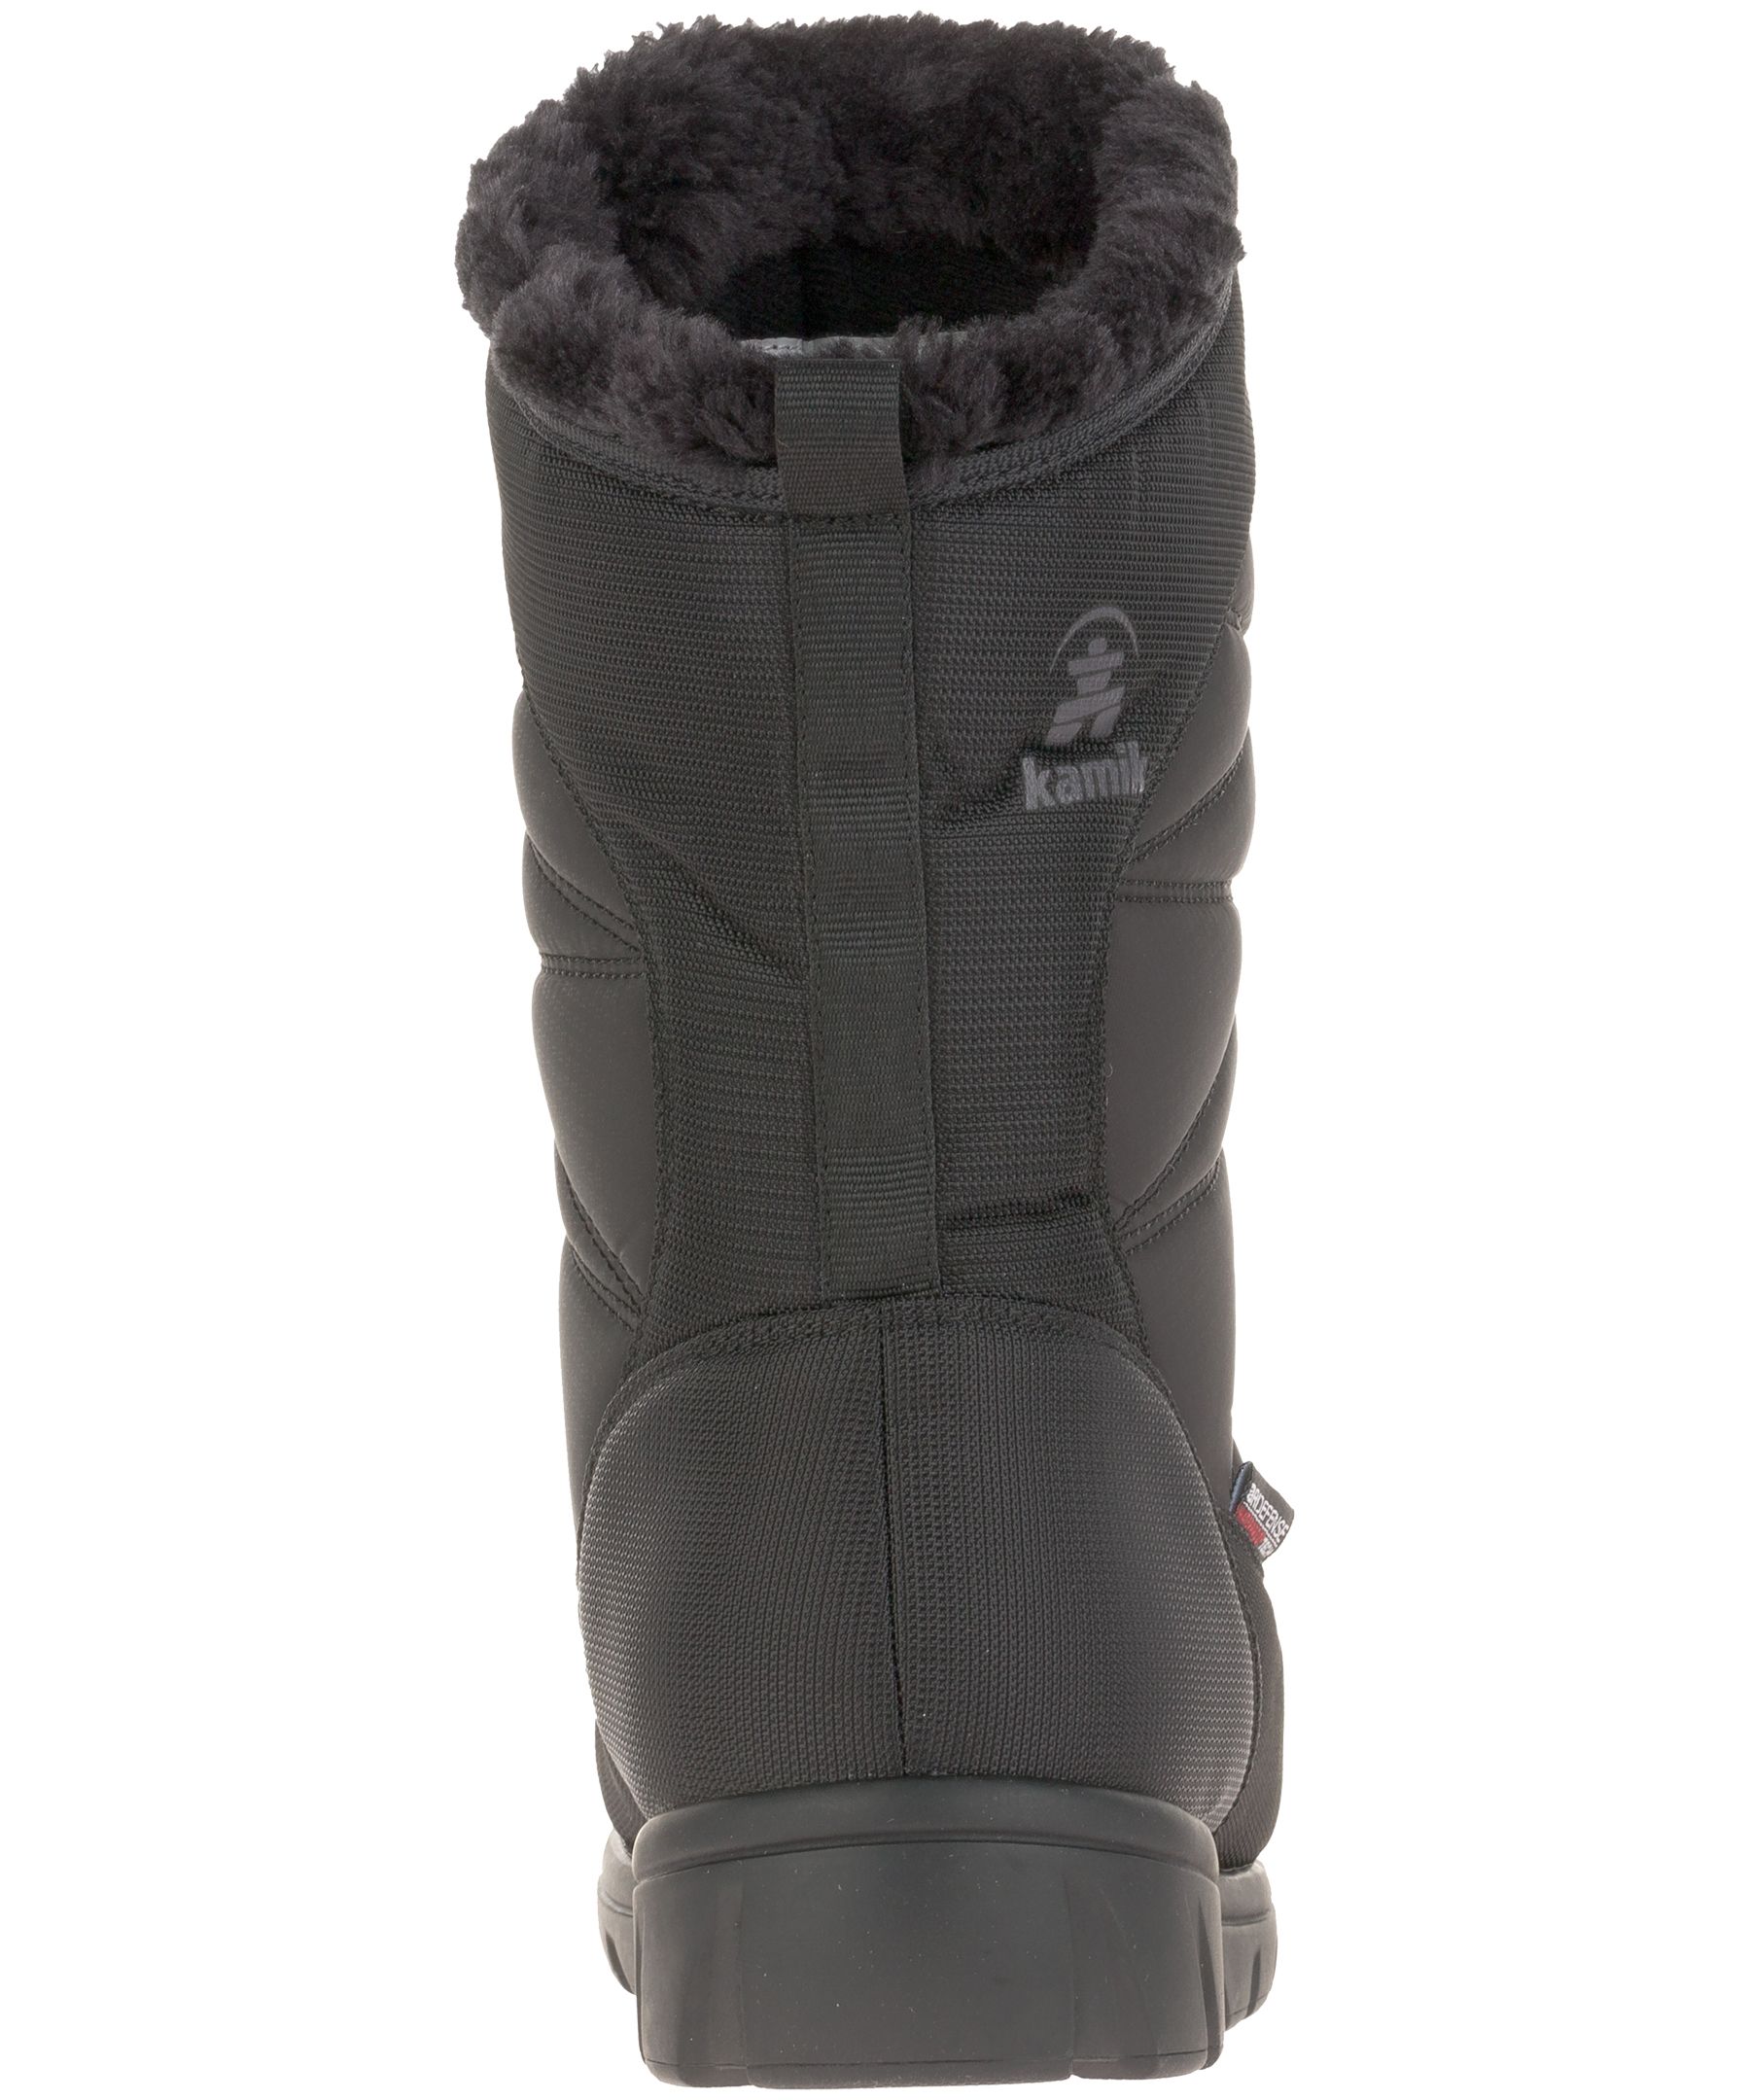 WindRiver Women's Summit II T-Max Insulated Winter Boots with Faux Fur Trim  - Black/White